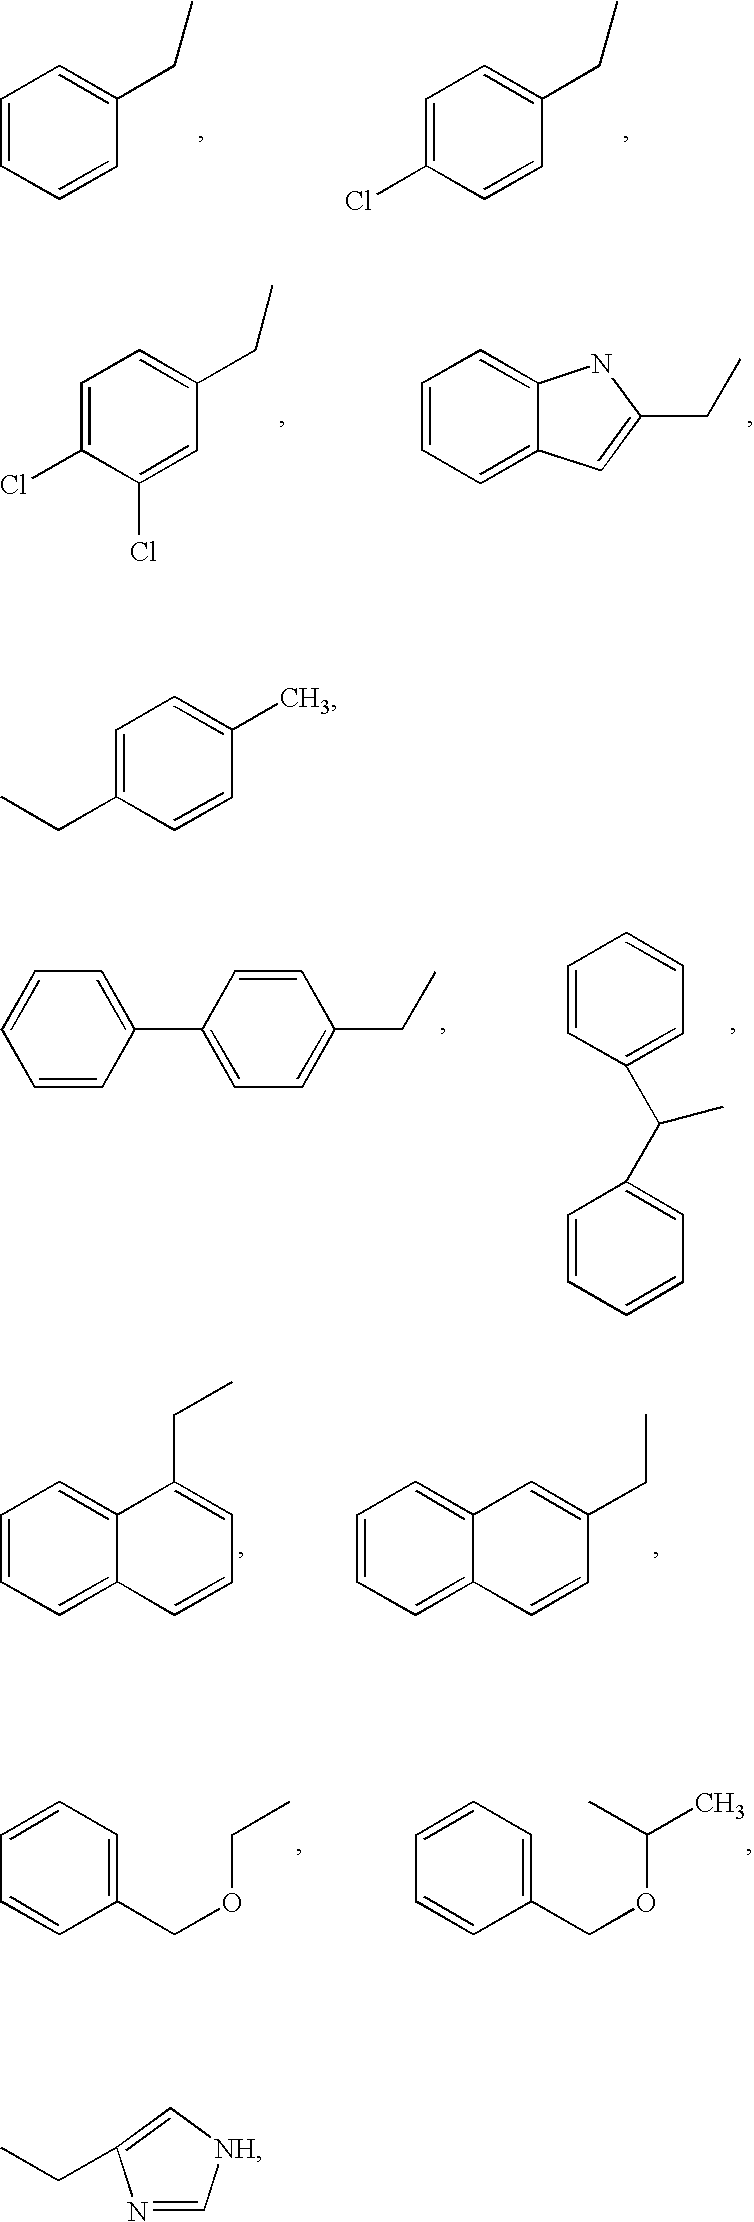 Cyclic peptide compositions and methods for treatment of sexual dysfunction